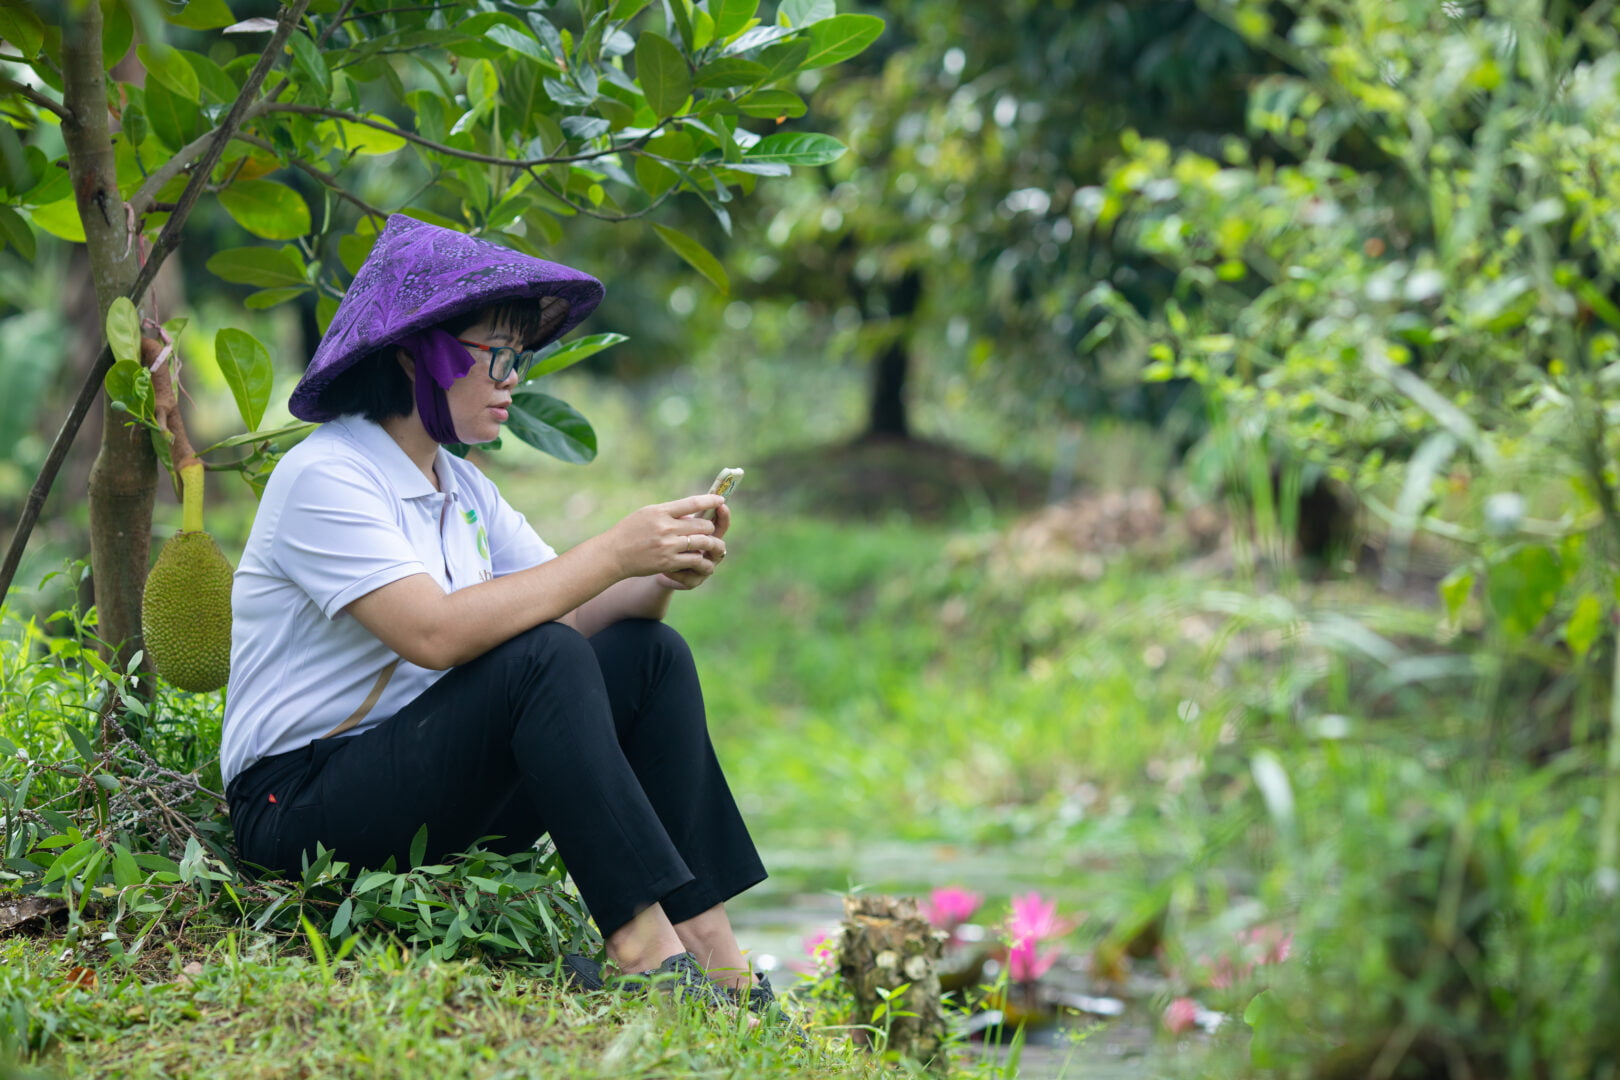 Nguyen Thi Kim Thoa sits in the grass at her farm and uses HerVenture